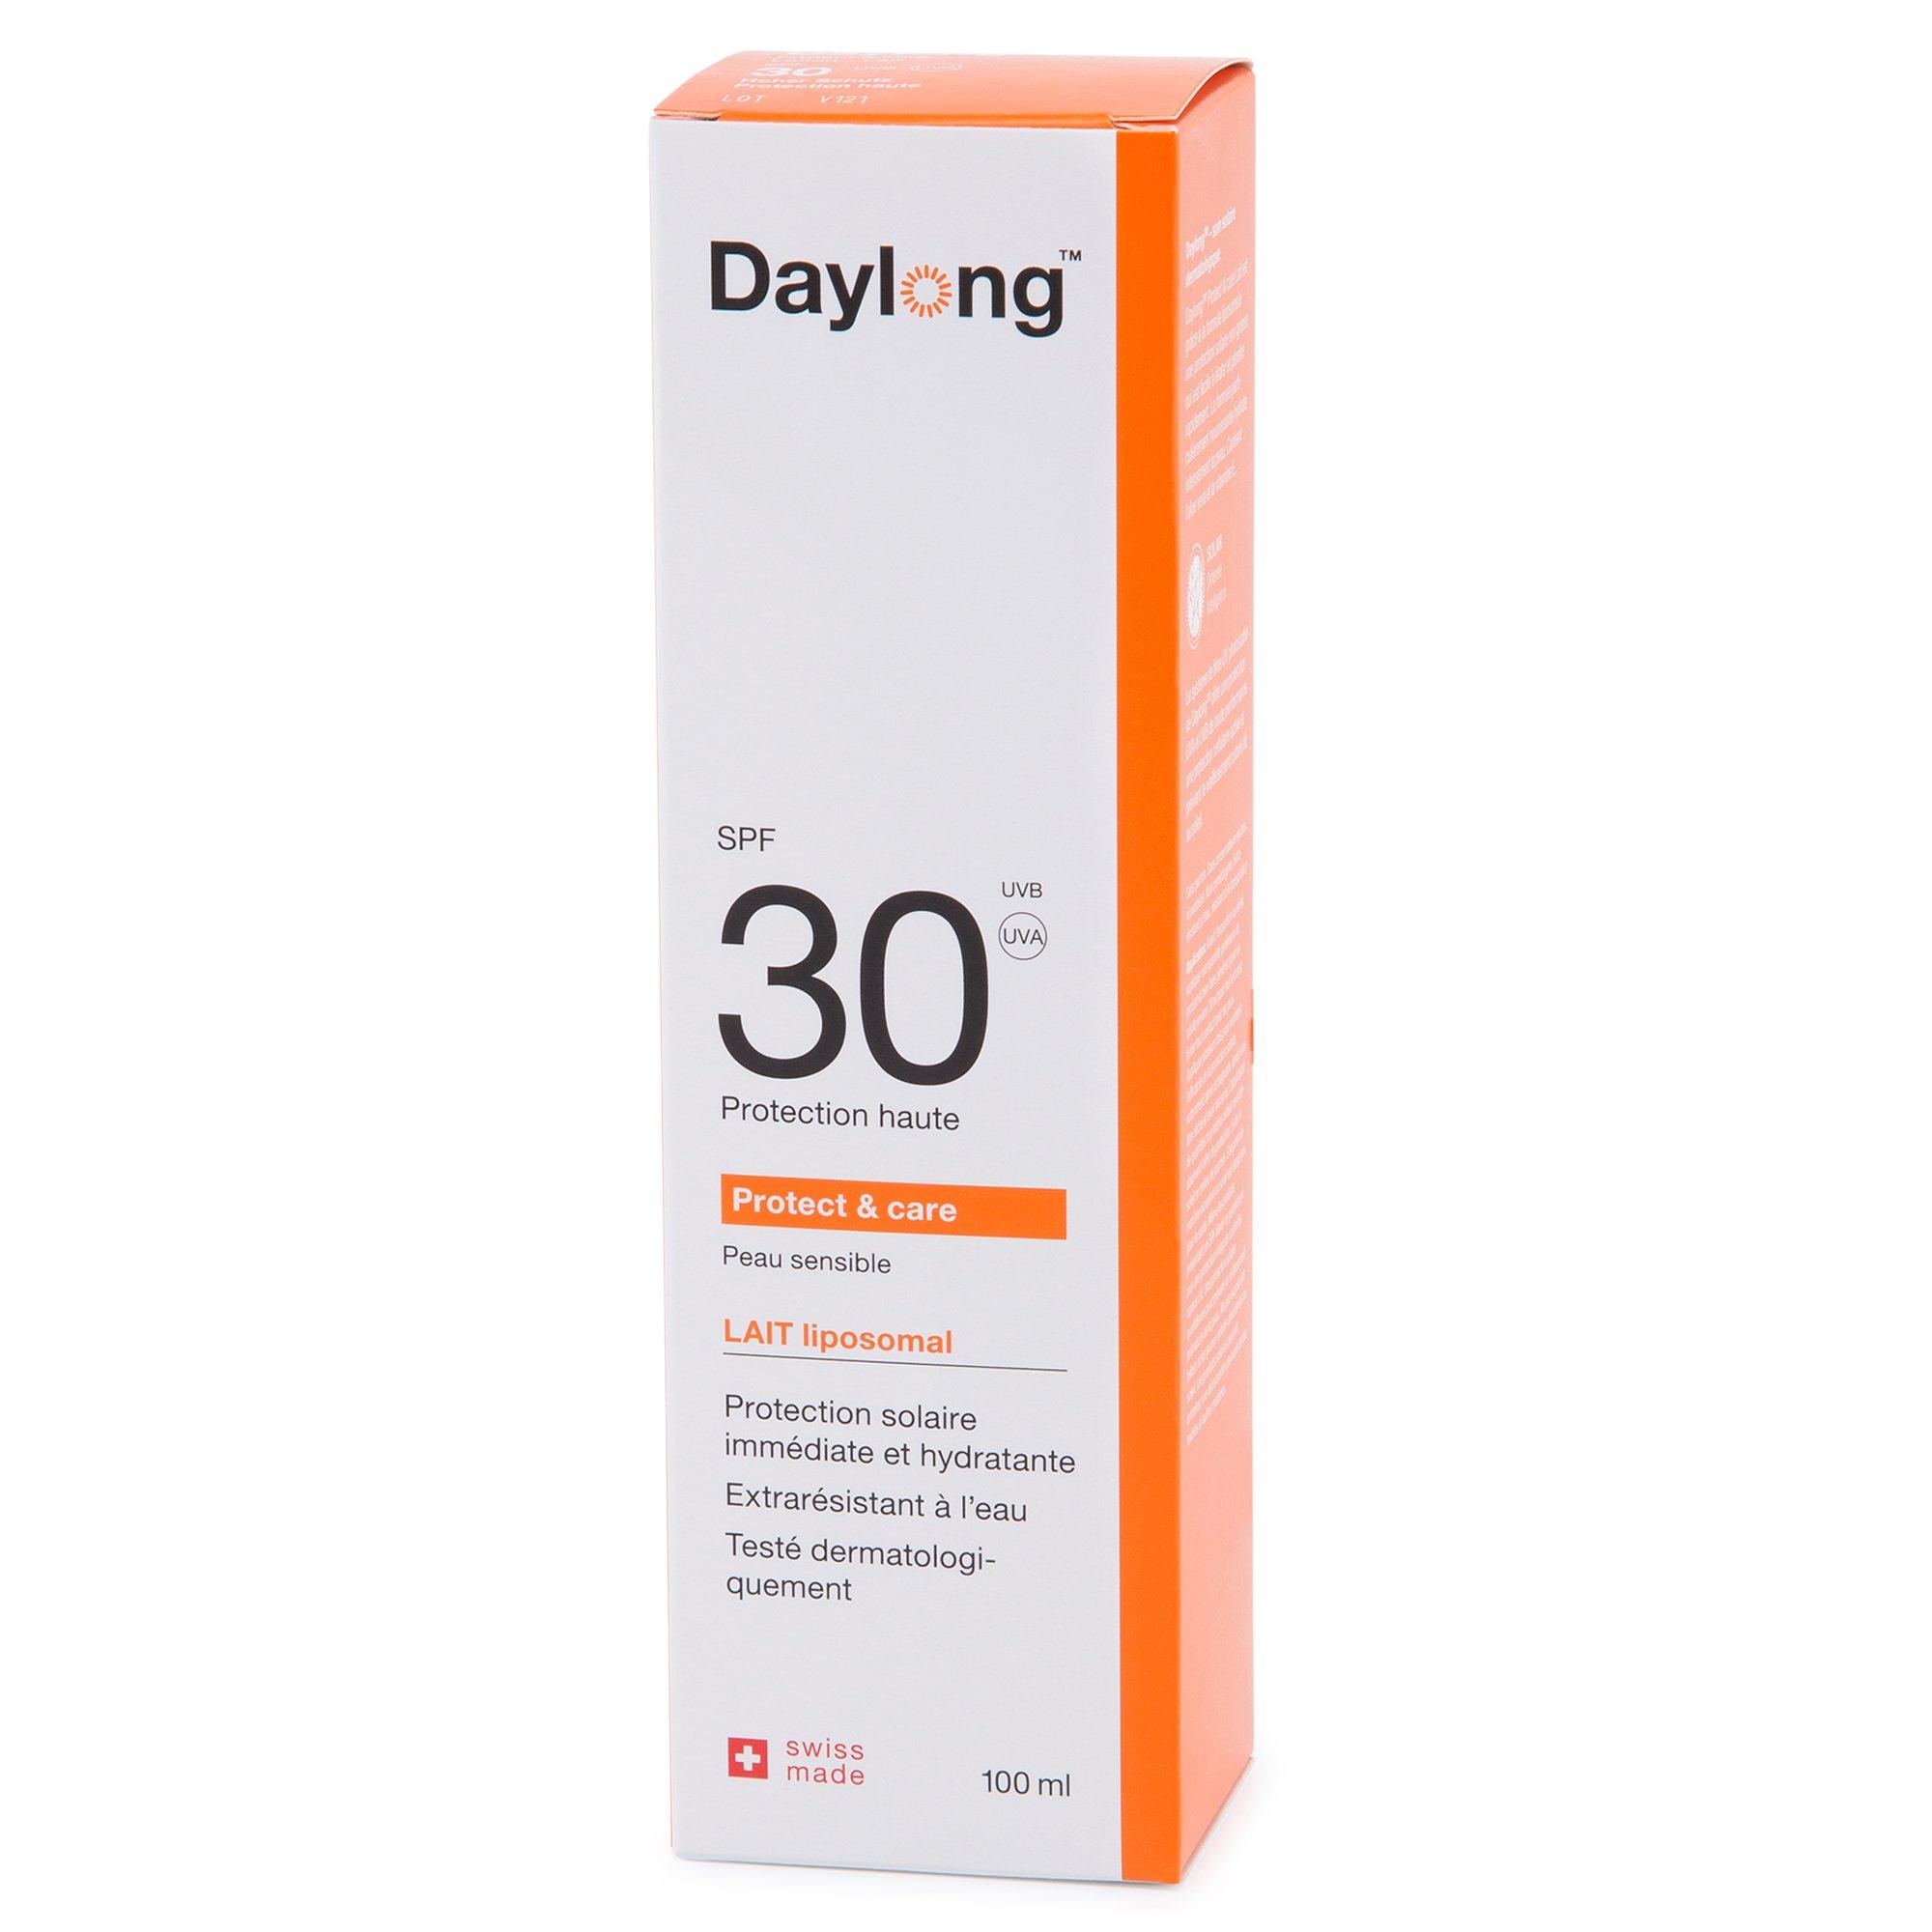 Image of Daylong Protect & care Lotion SPF 30 Protect & Care Lotion SPF 30 - 100 ml